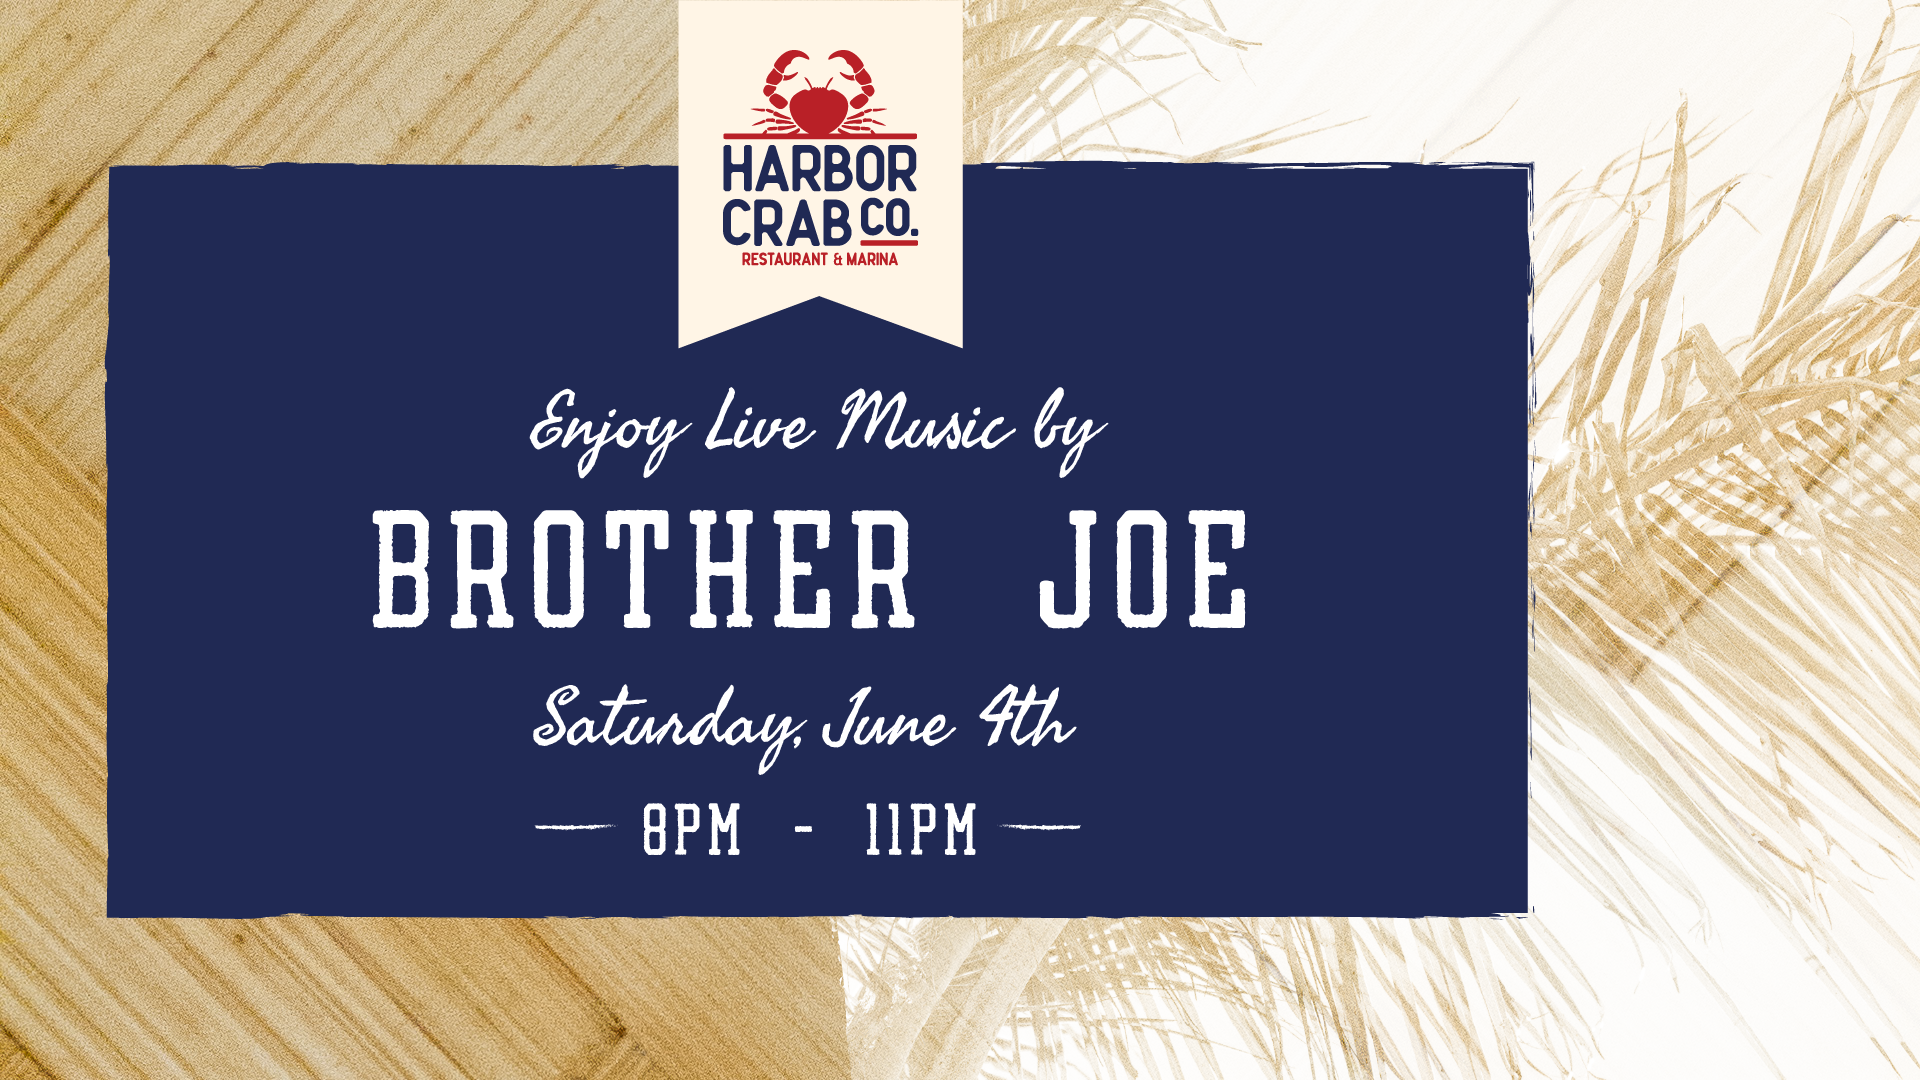 Flyer for Brother Joe on Sat June 4th at 8pm